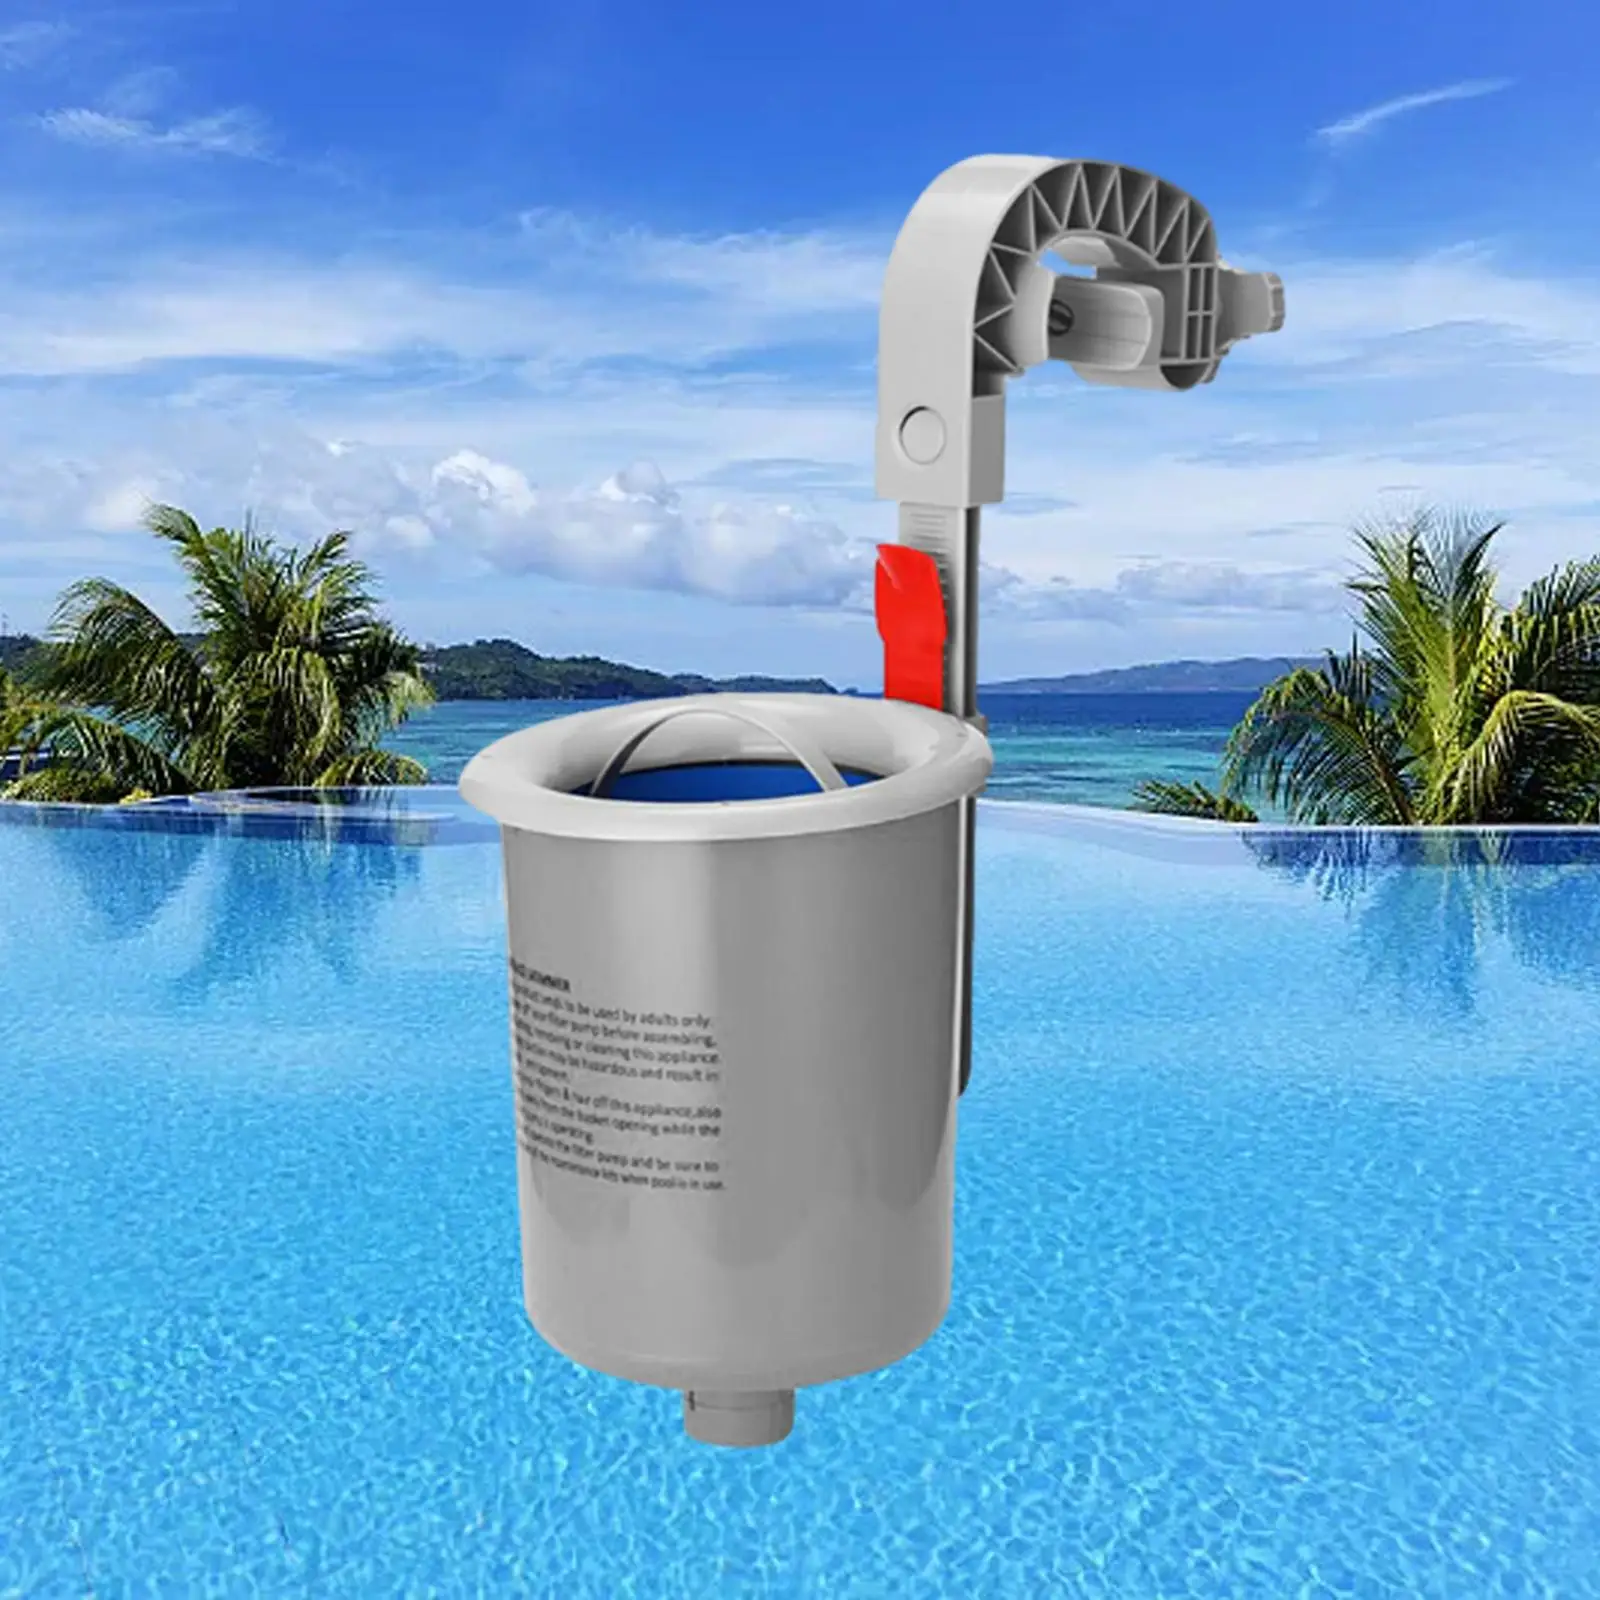 Pond Skimmer Kits Wall Mount Floating Pool Filter Pool Maintenance Cleaner Easy to Install Surface Skimmer for Removes Clean